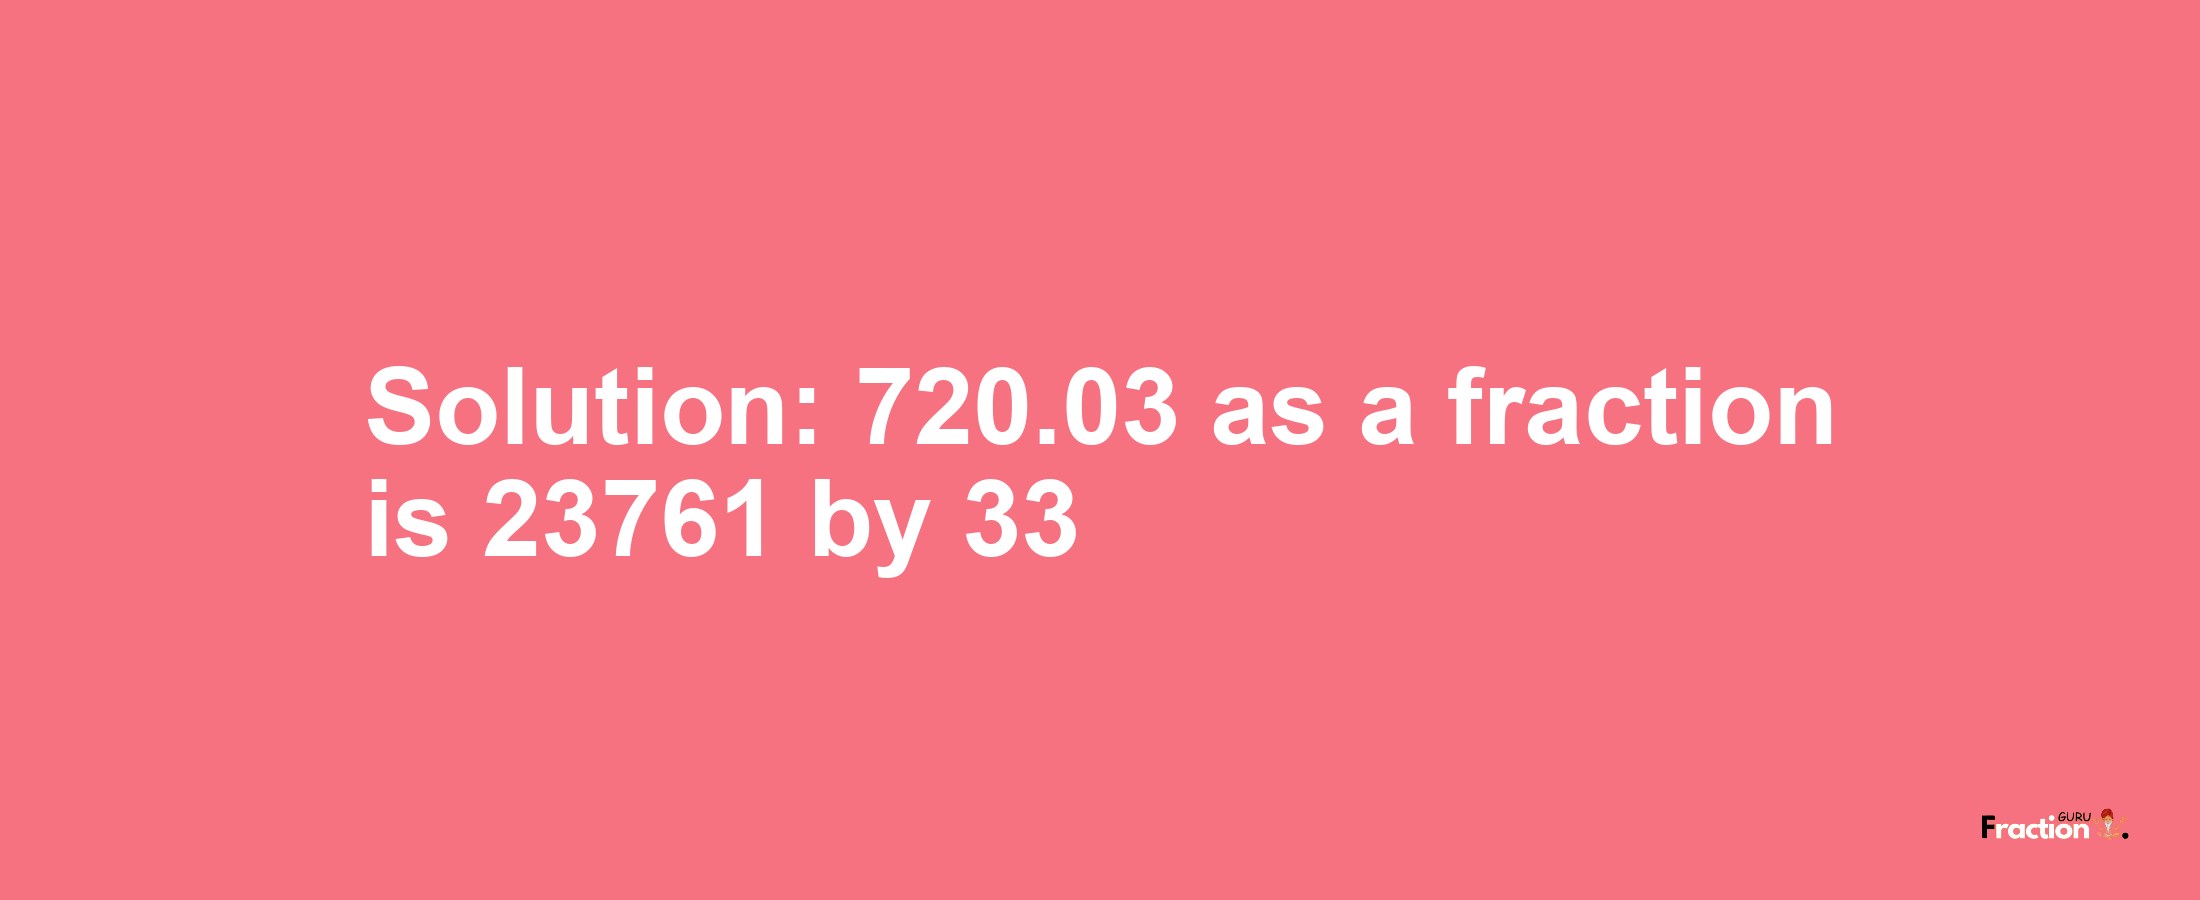 Solution:720.03 as a fraction is 23761/33